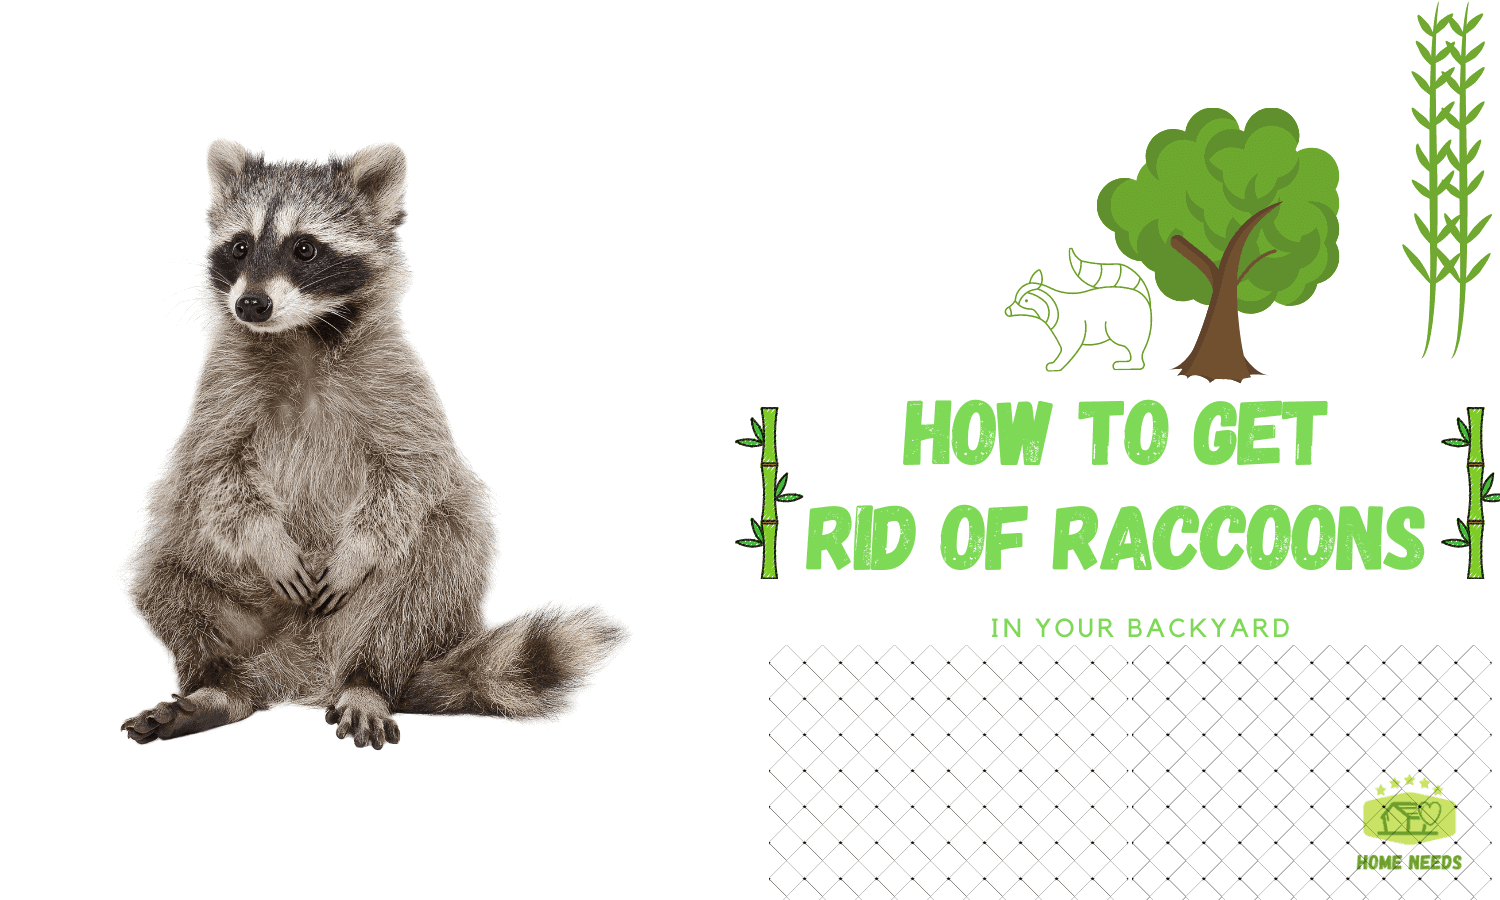 HOW TO GET RID OF RACCOONS